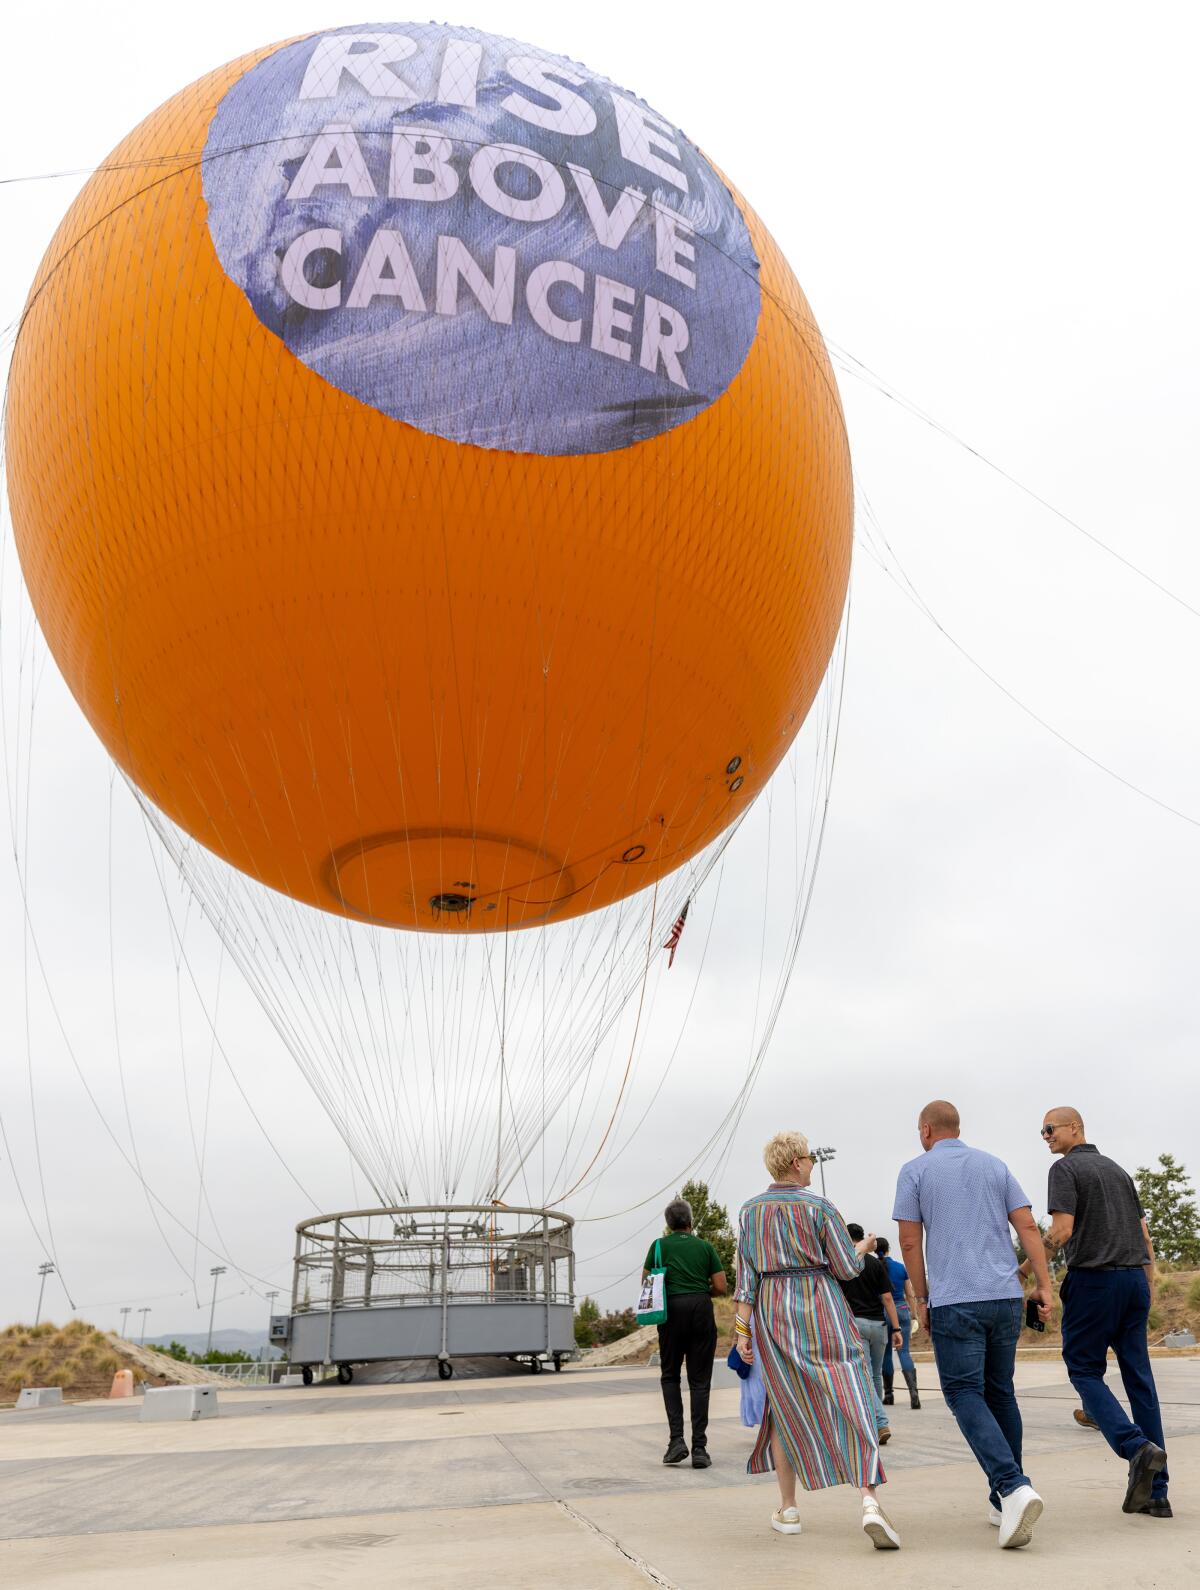 City of Hope Orange County cancer survivors prepare to ride in the Great Park Balloon at Great Park in Irvine.